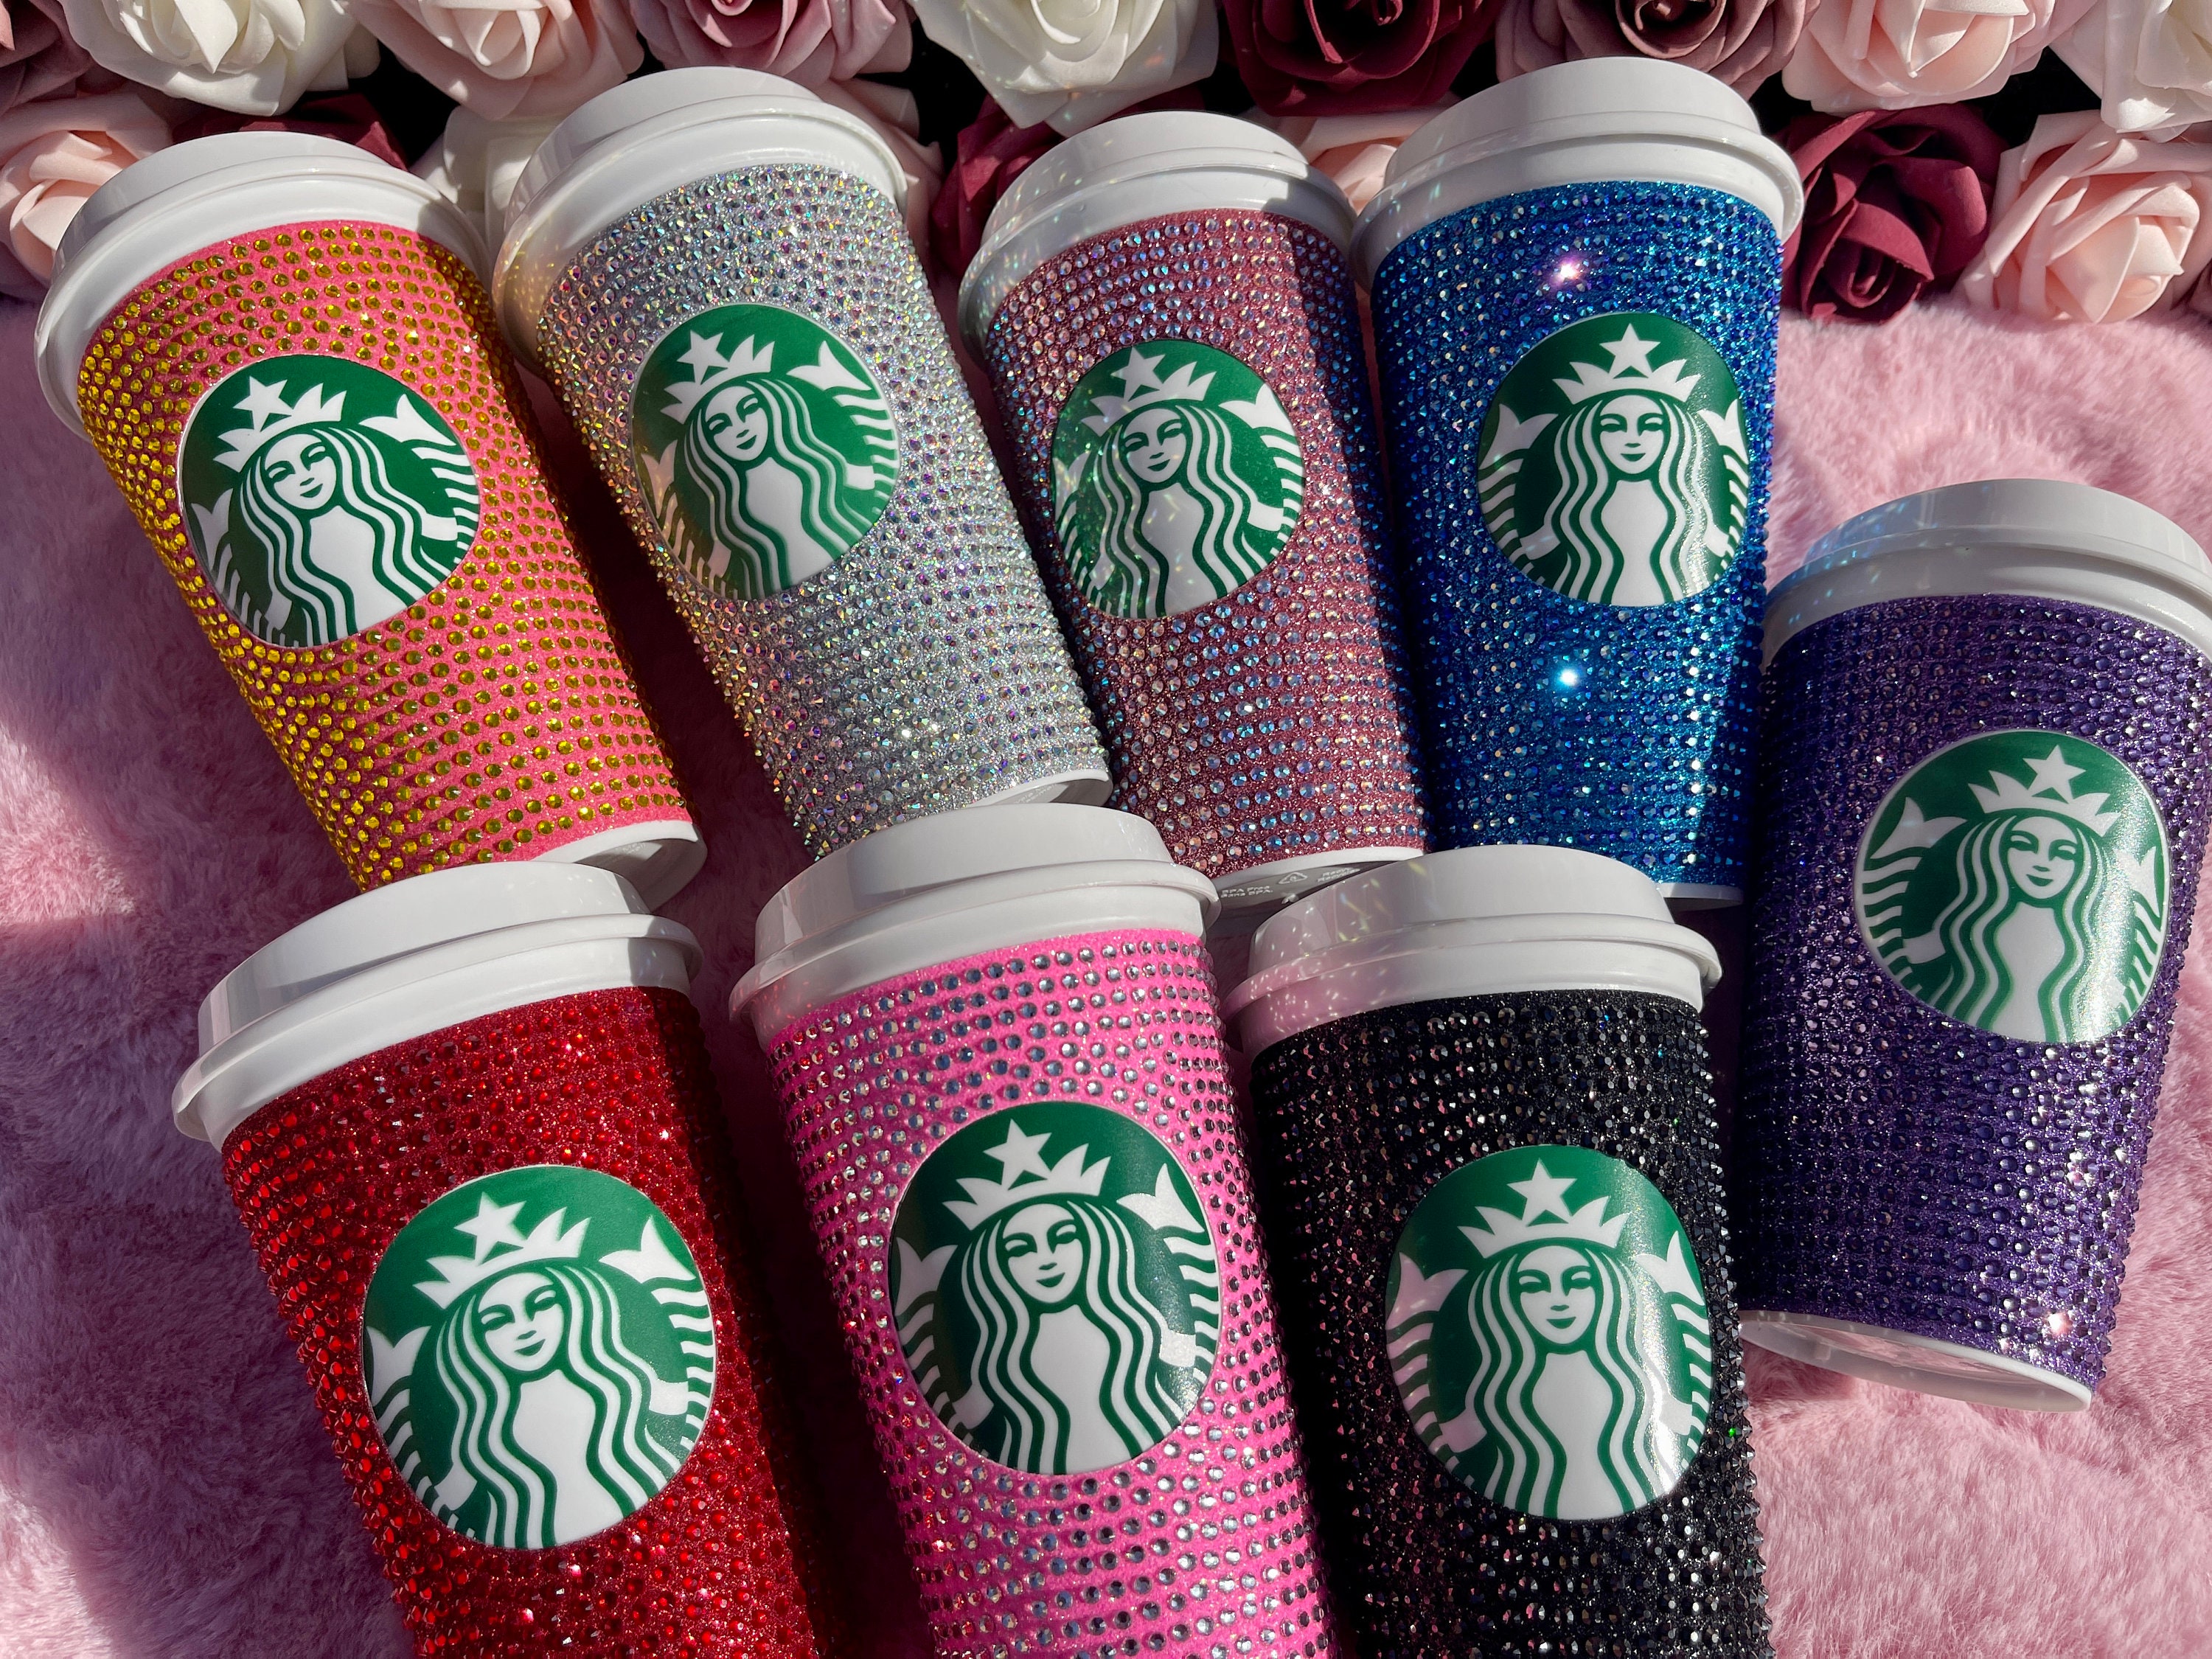 Starbucks has officially abandoned straws in favor of sippy cup lids   well, mostly